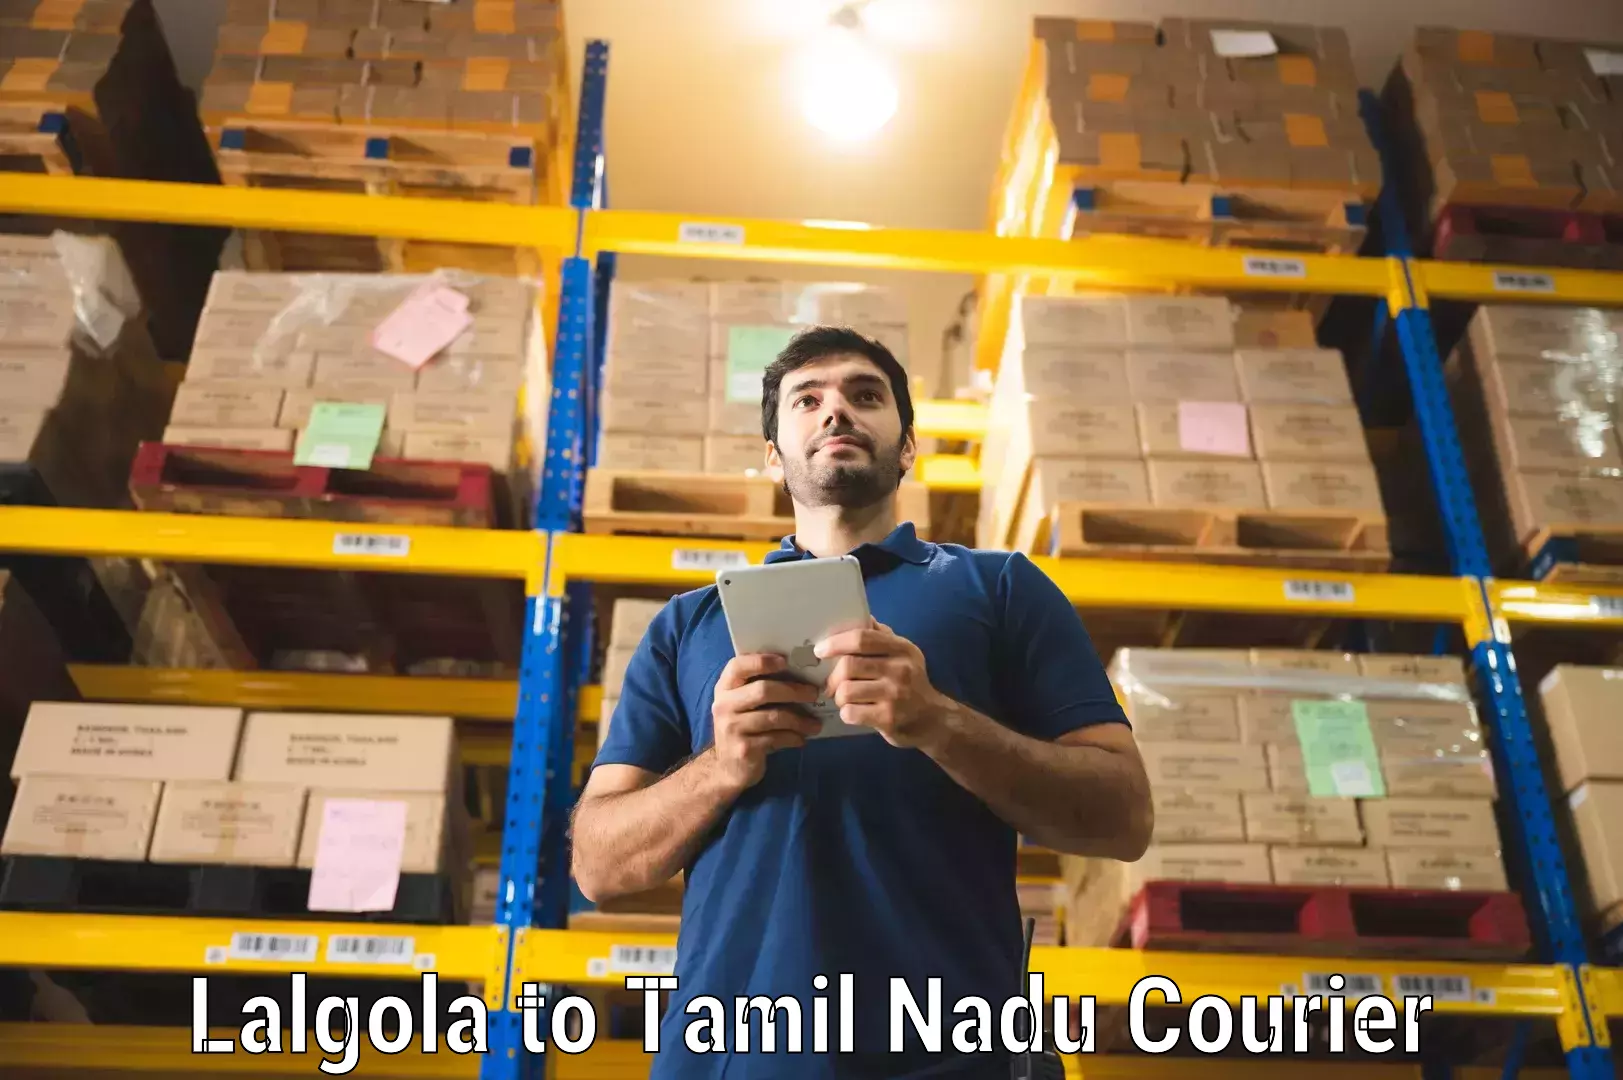 Advanced shipping services Lalgola to Shanmugha Arts Science Technology and Research Academy Thanjavur